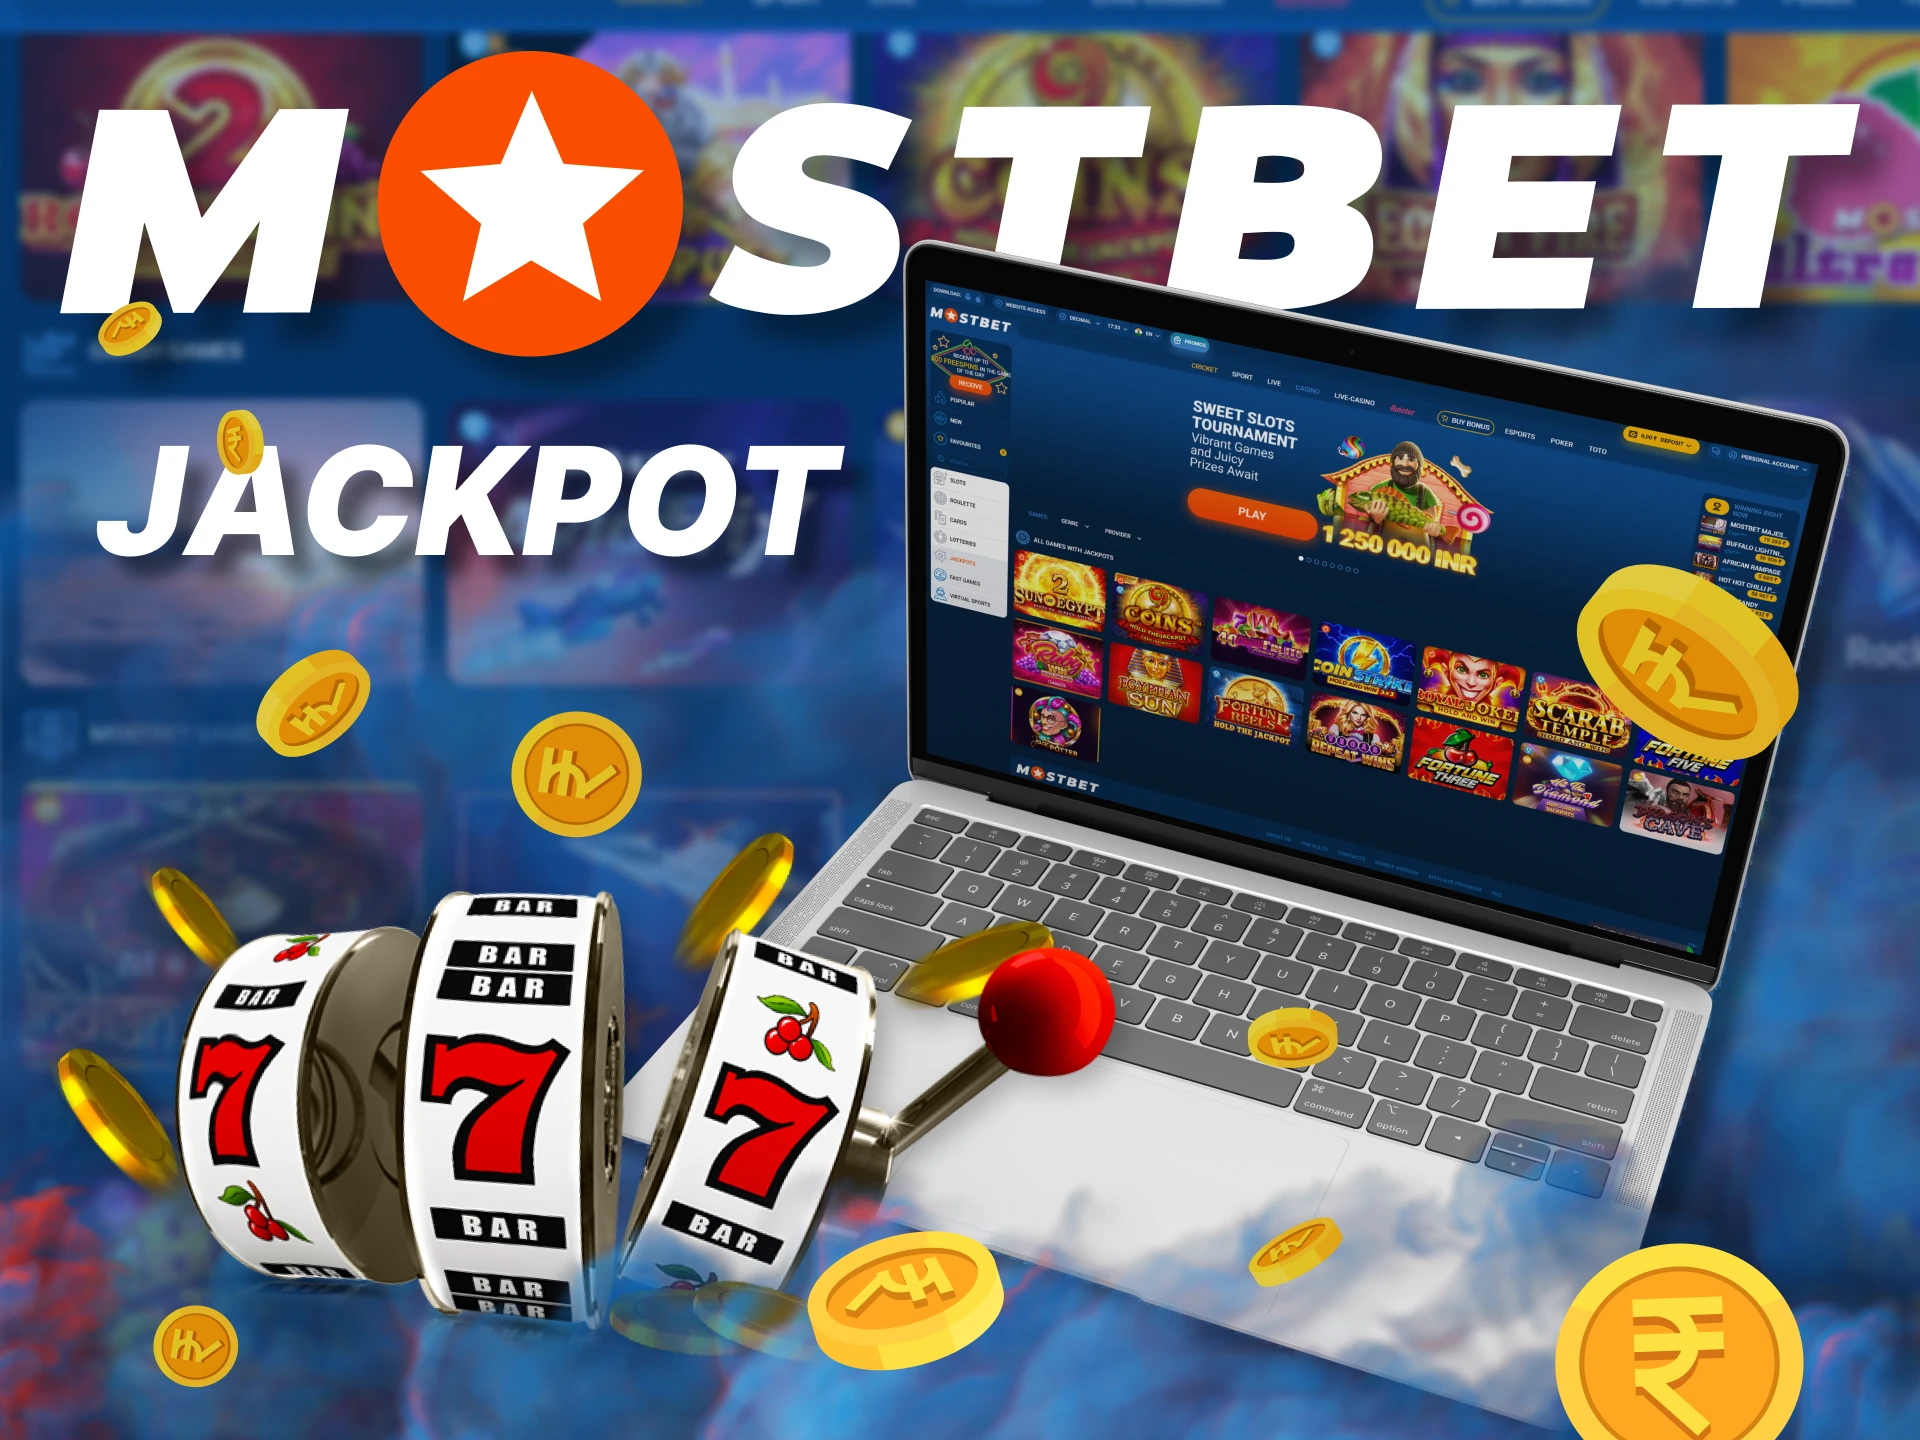 Take the Jackpot at Mostbet Casino.